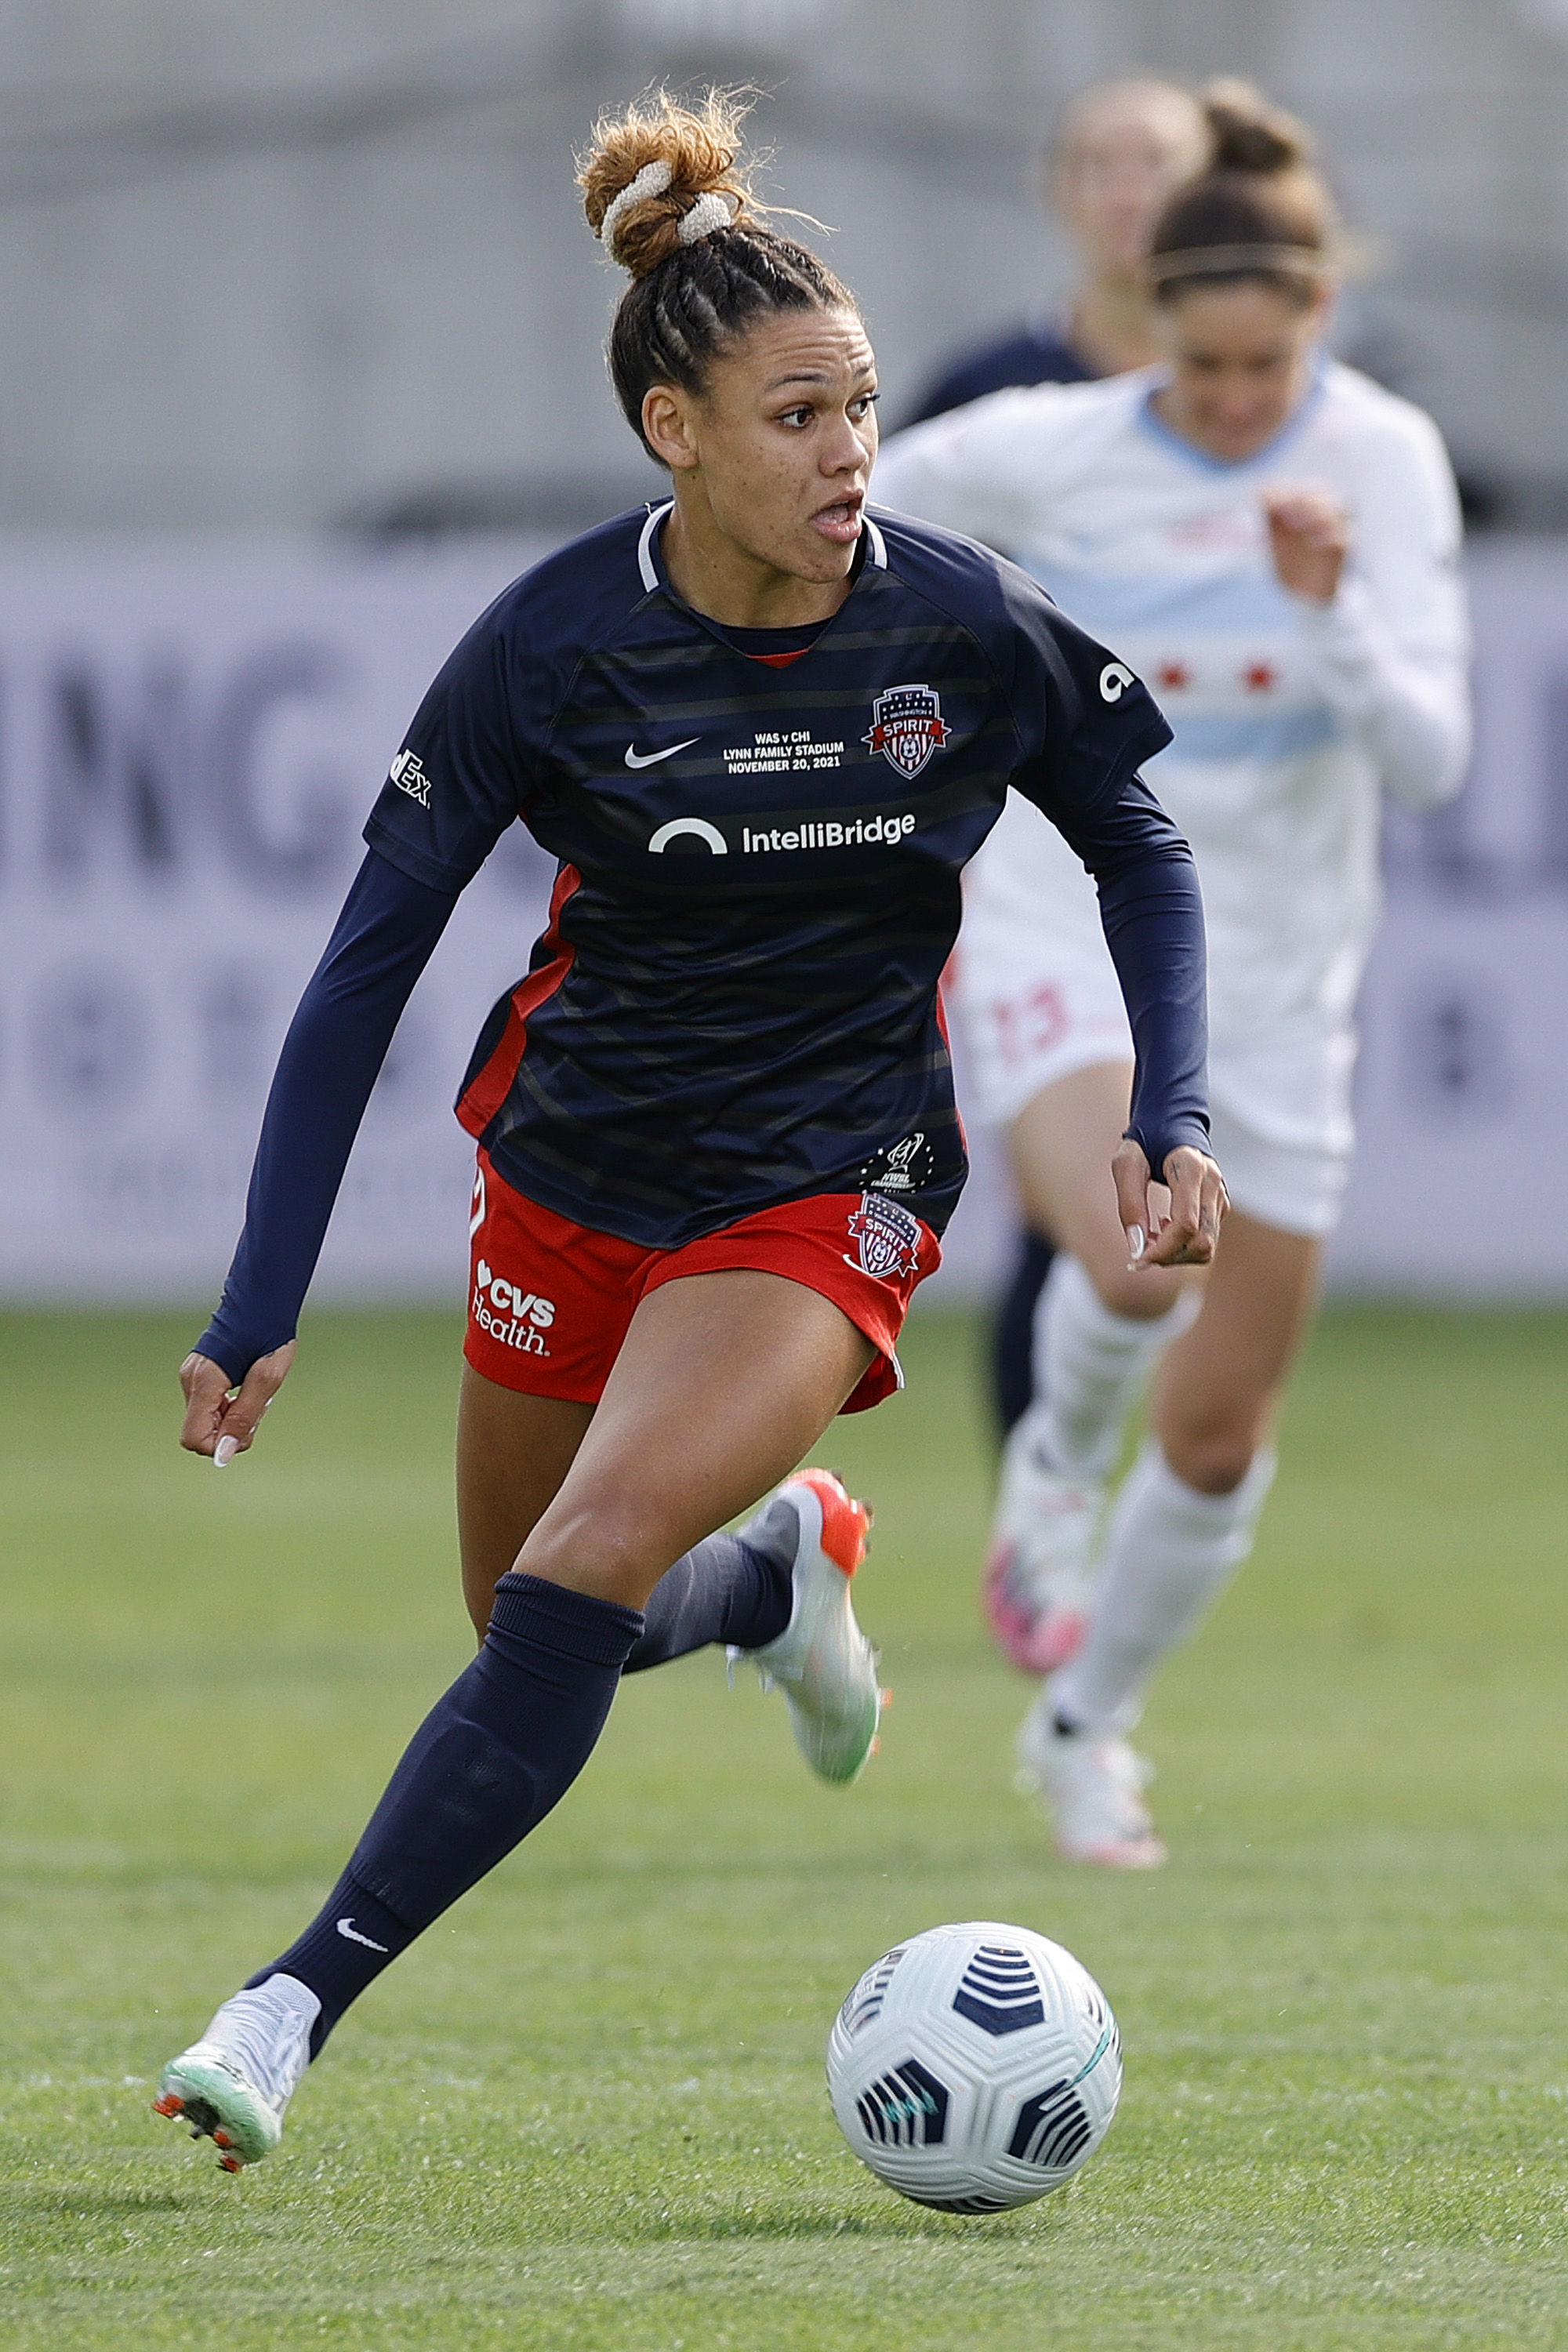 Trinity Rodman USWNT Call-Up A First For NWSL Starlet